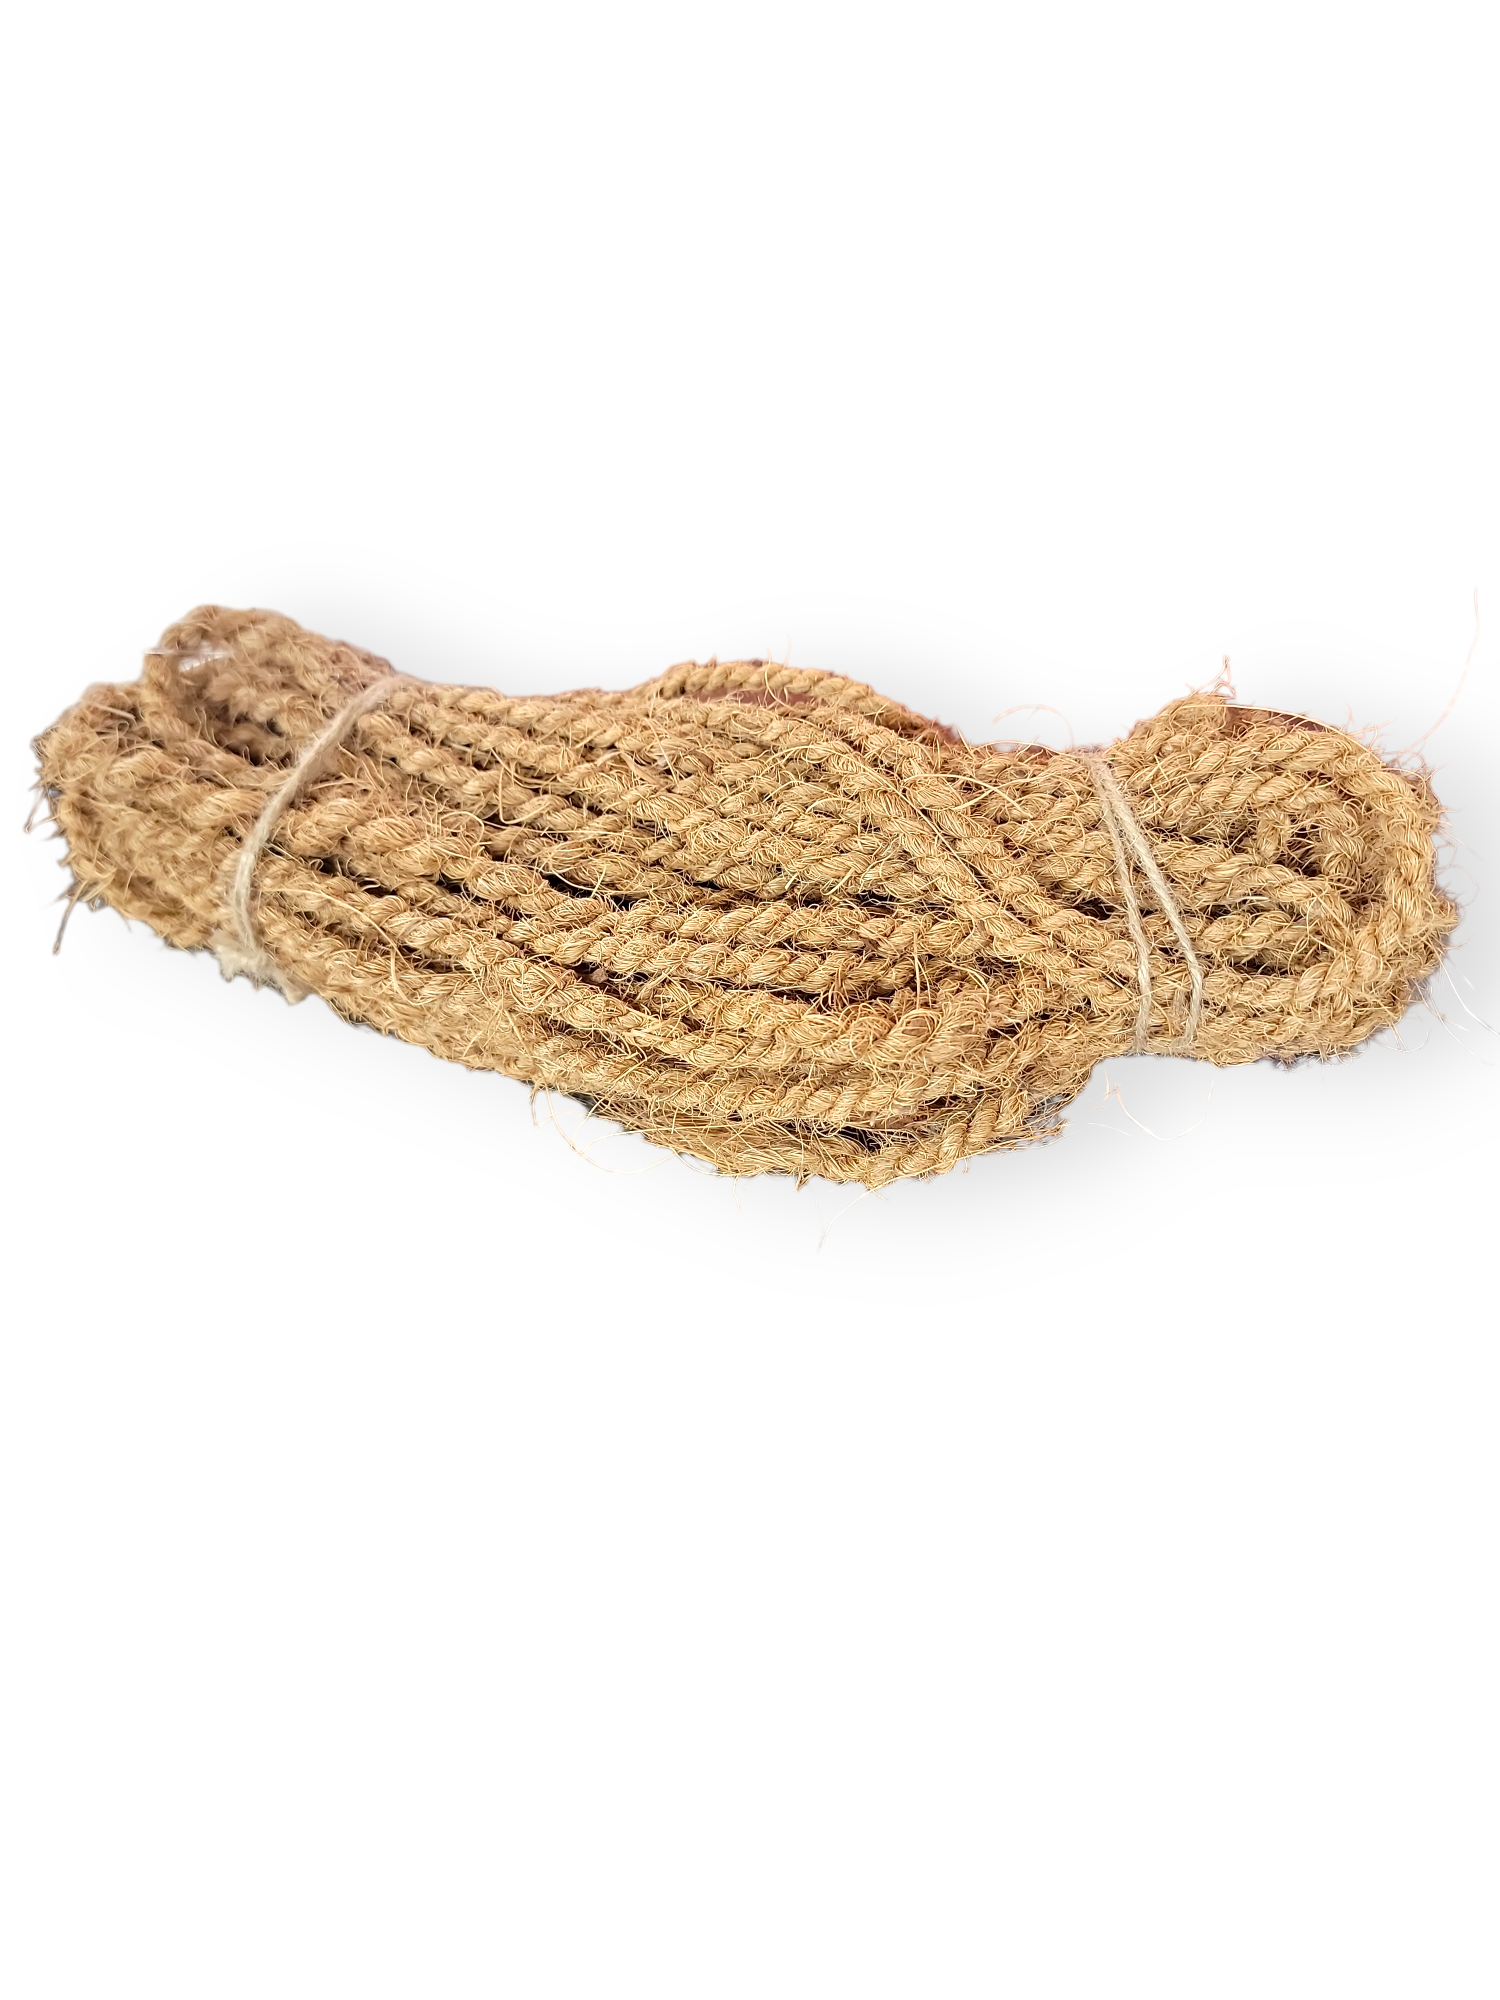 Coconut Rope for bird toys